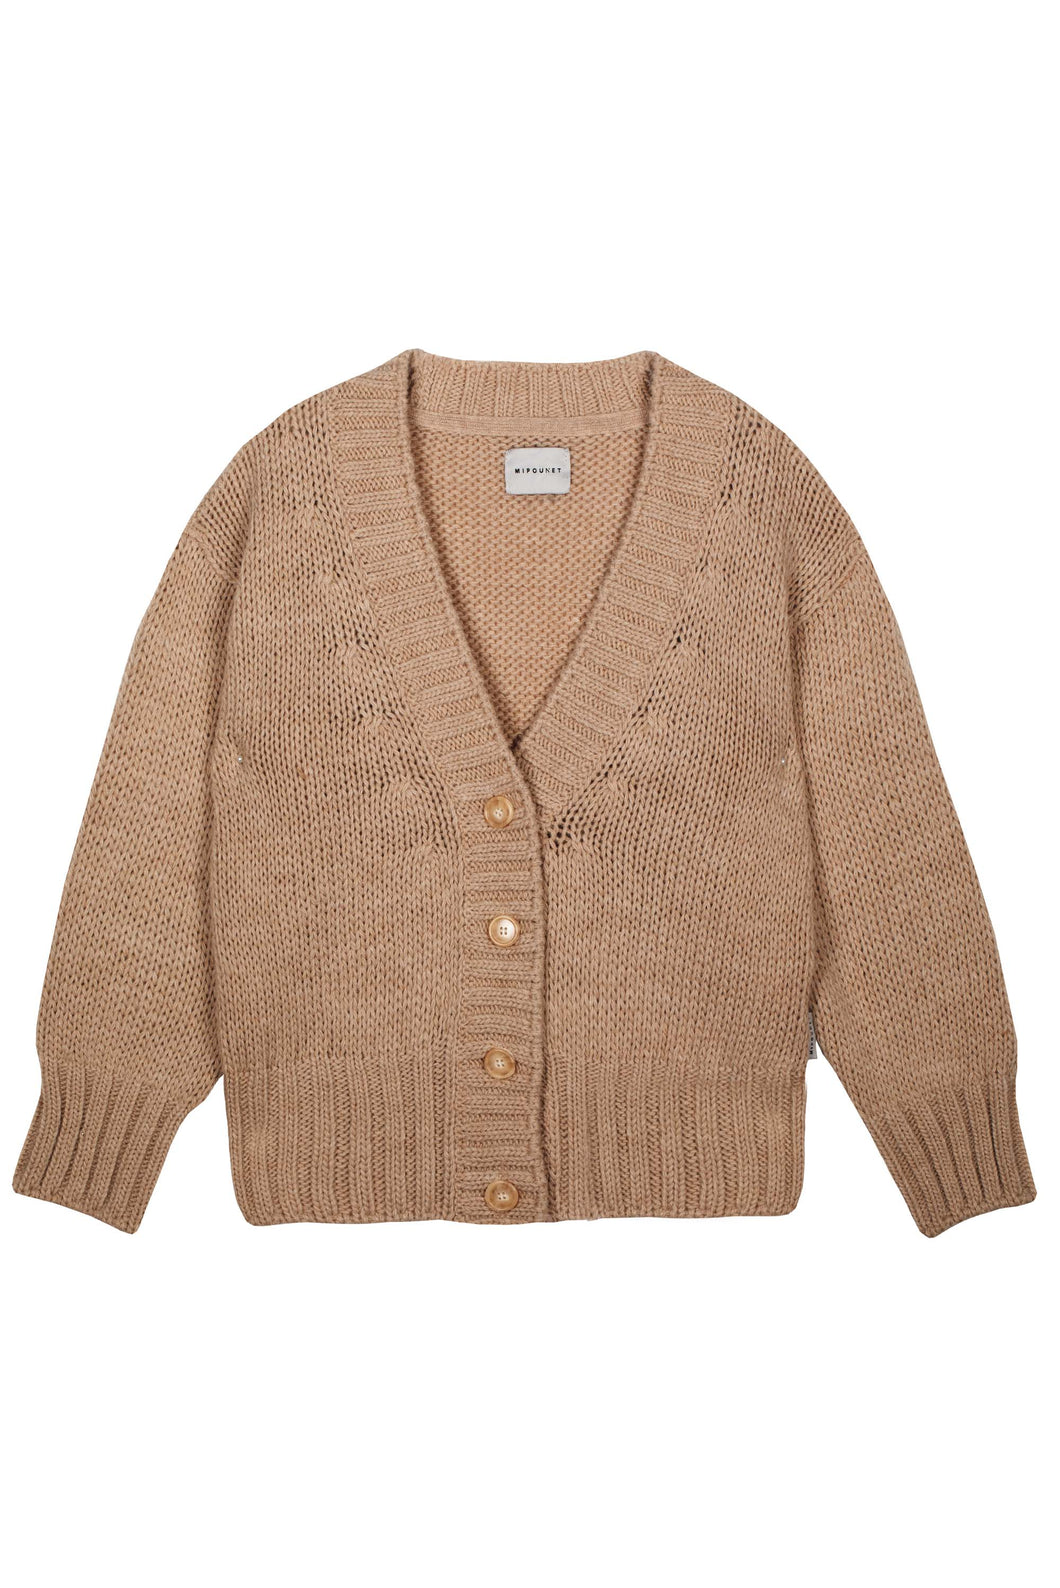 Mipounet Oversized Knit Cardigan - Brown - 4Y, 6Y